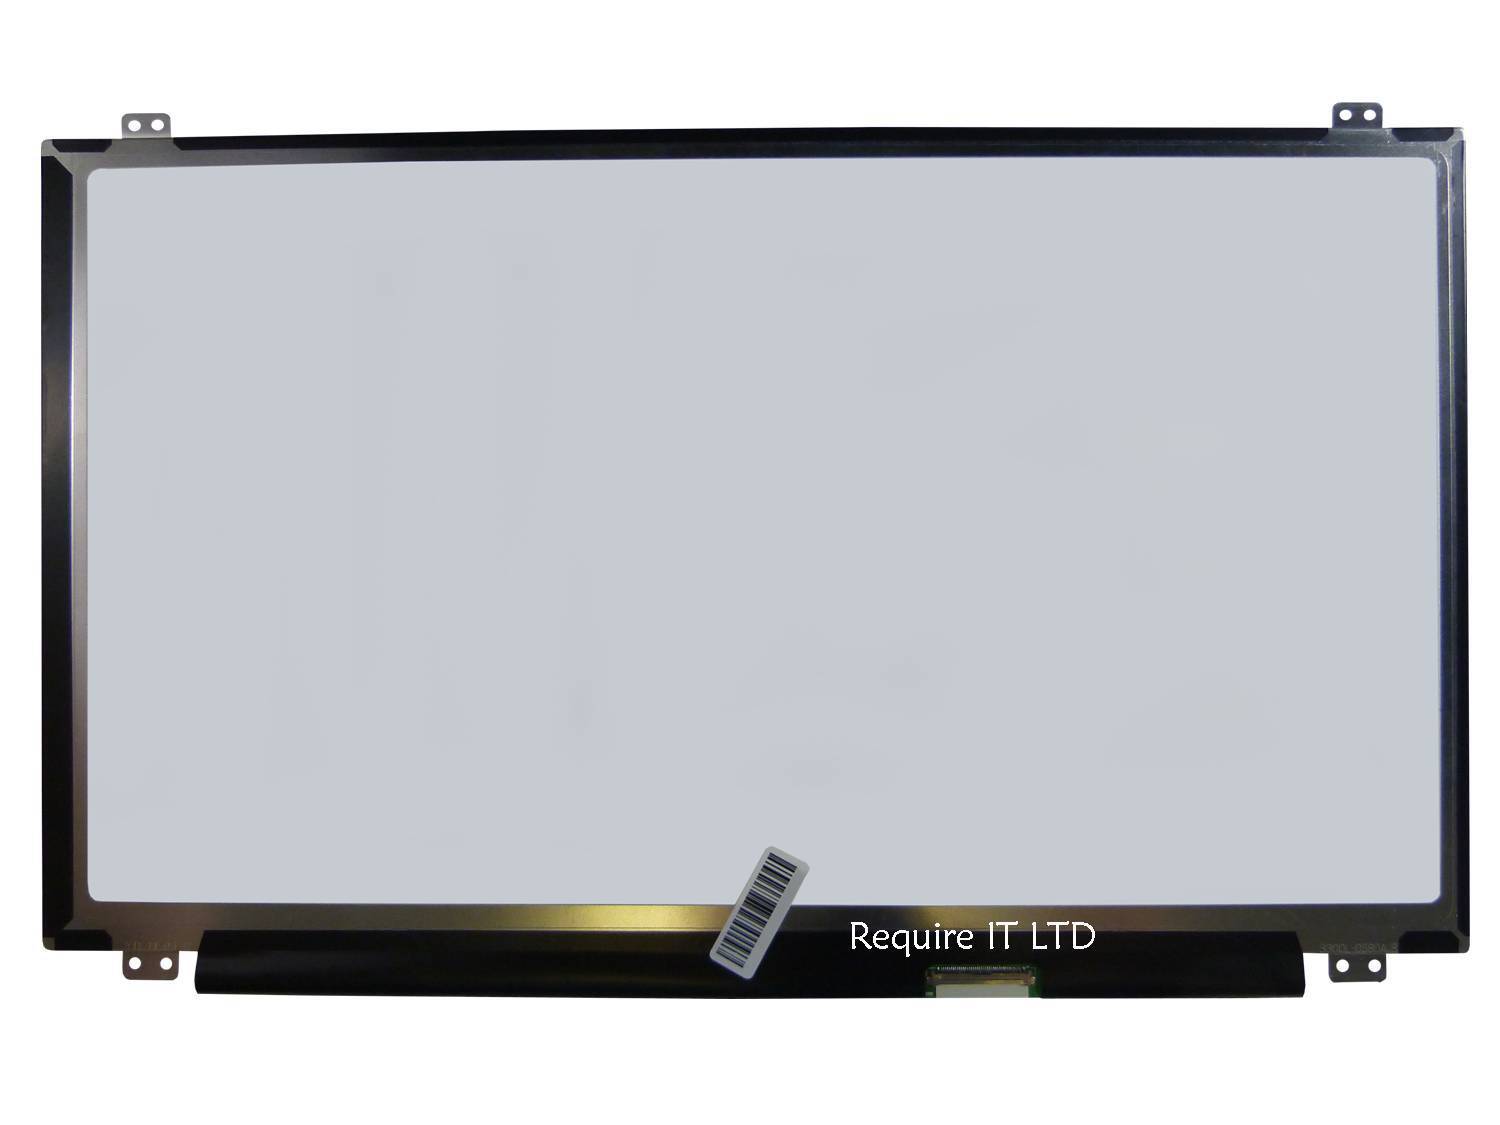 Dell-Screen-156AP-Dell-156AP-156AP-Laptop Screens | LaptopSA.co.za a division of the notebook company 